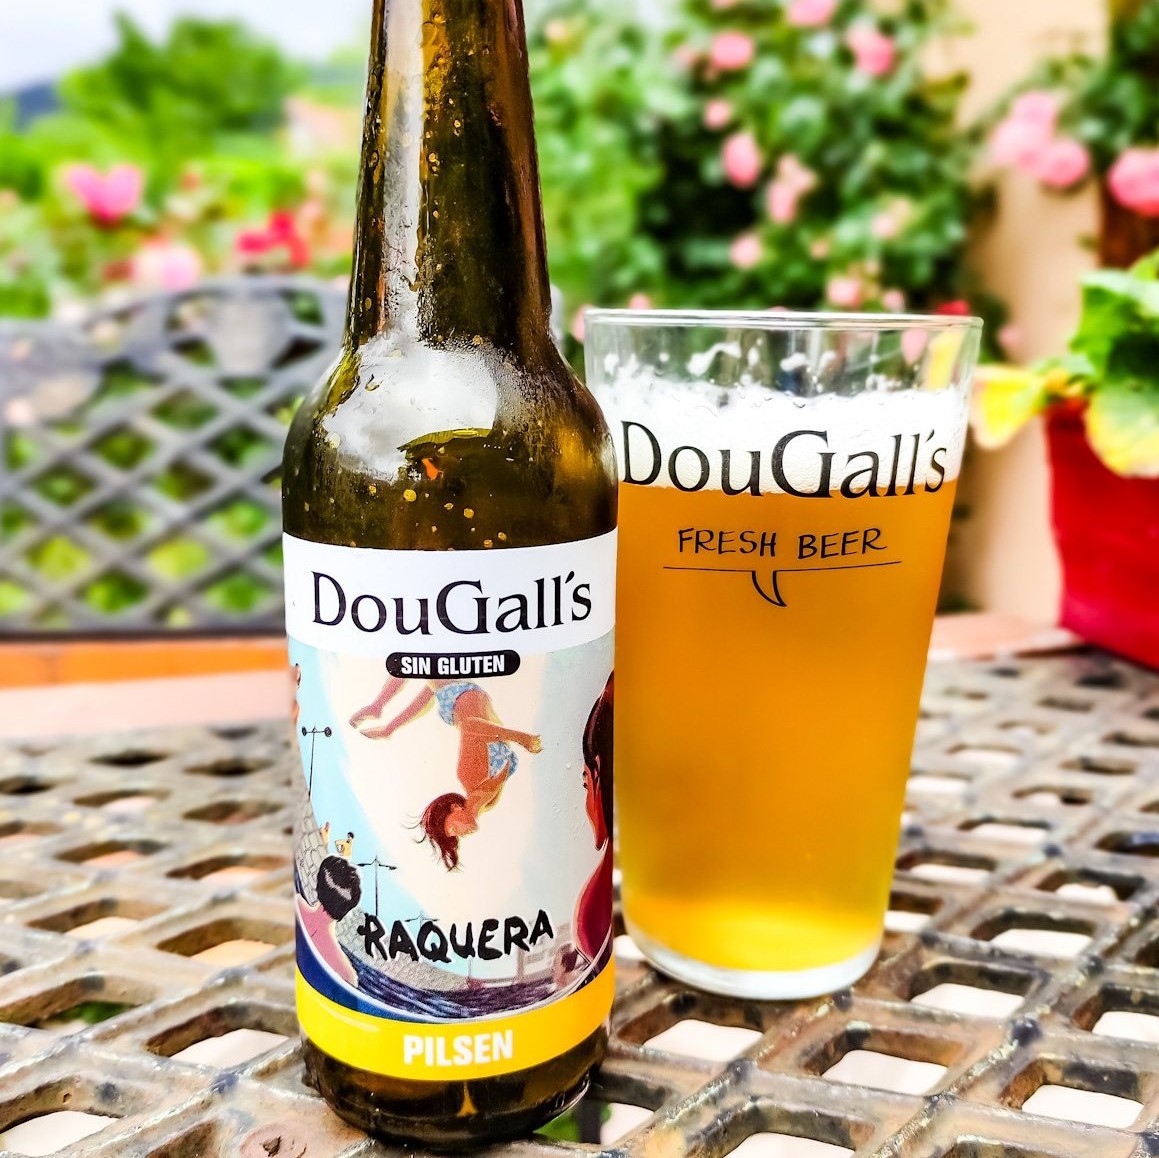 Raquera pils | DouGall’s brewery in Lierganes, Cantabria, Spain | Craft Beer Nomads blog